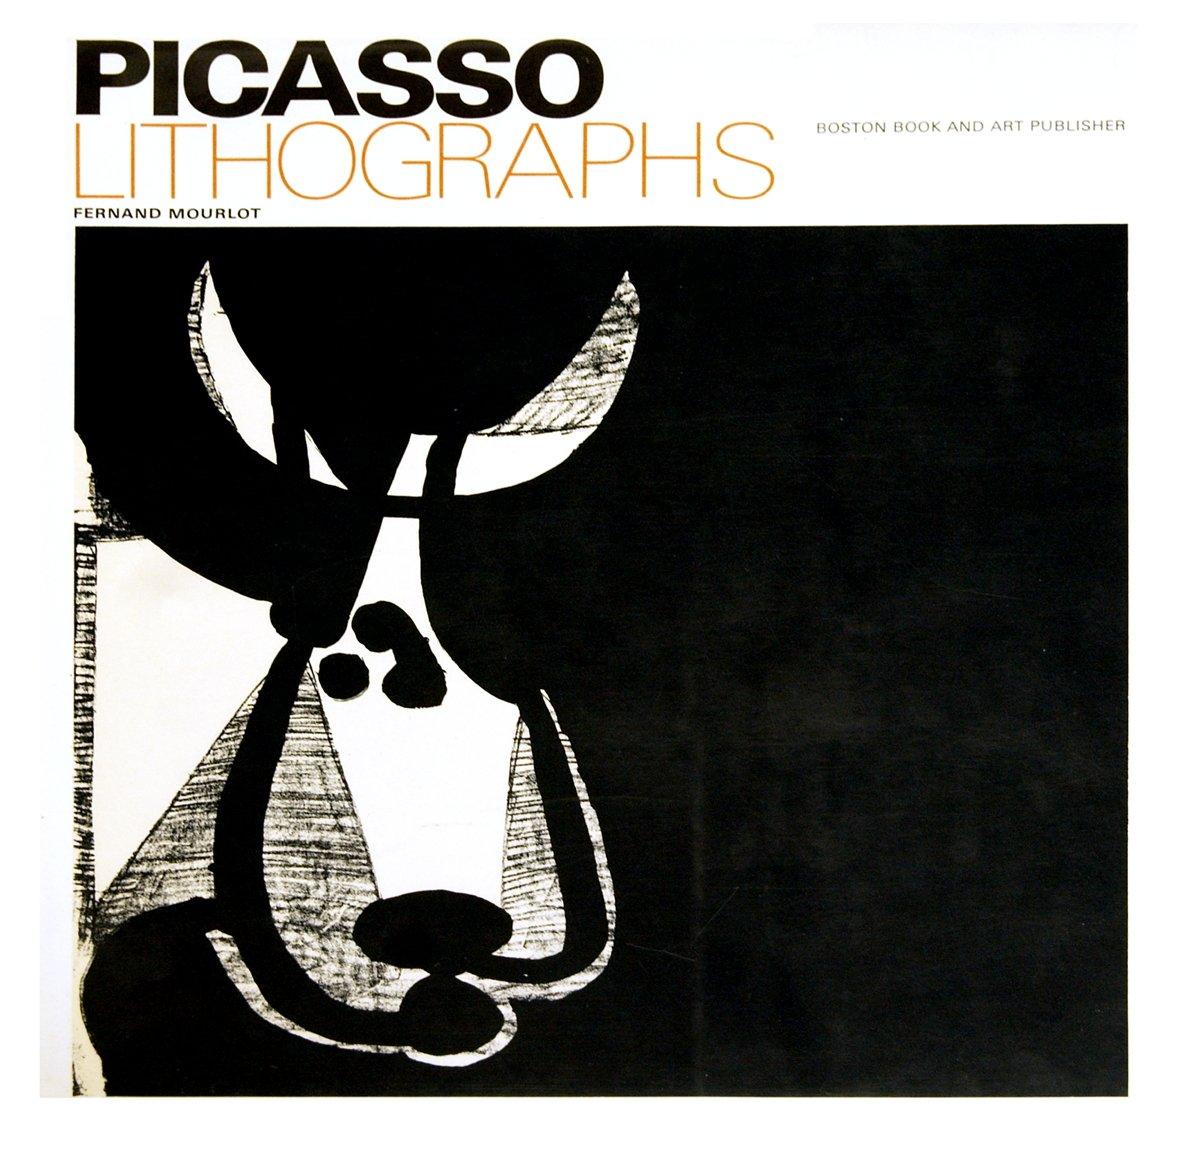 1970 After Pablo Picasso 'Pablo Picasso Lithographs by Fernand Mourlot' book